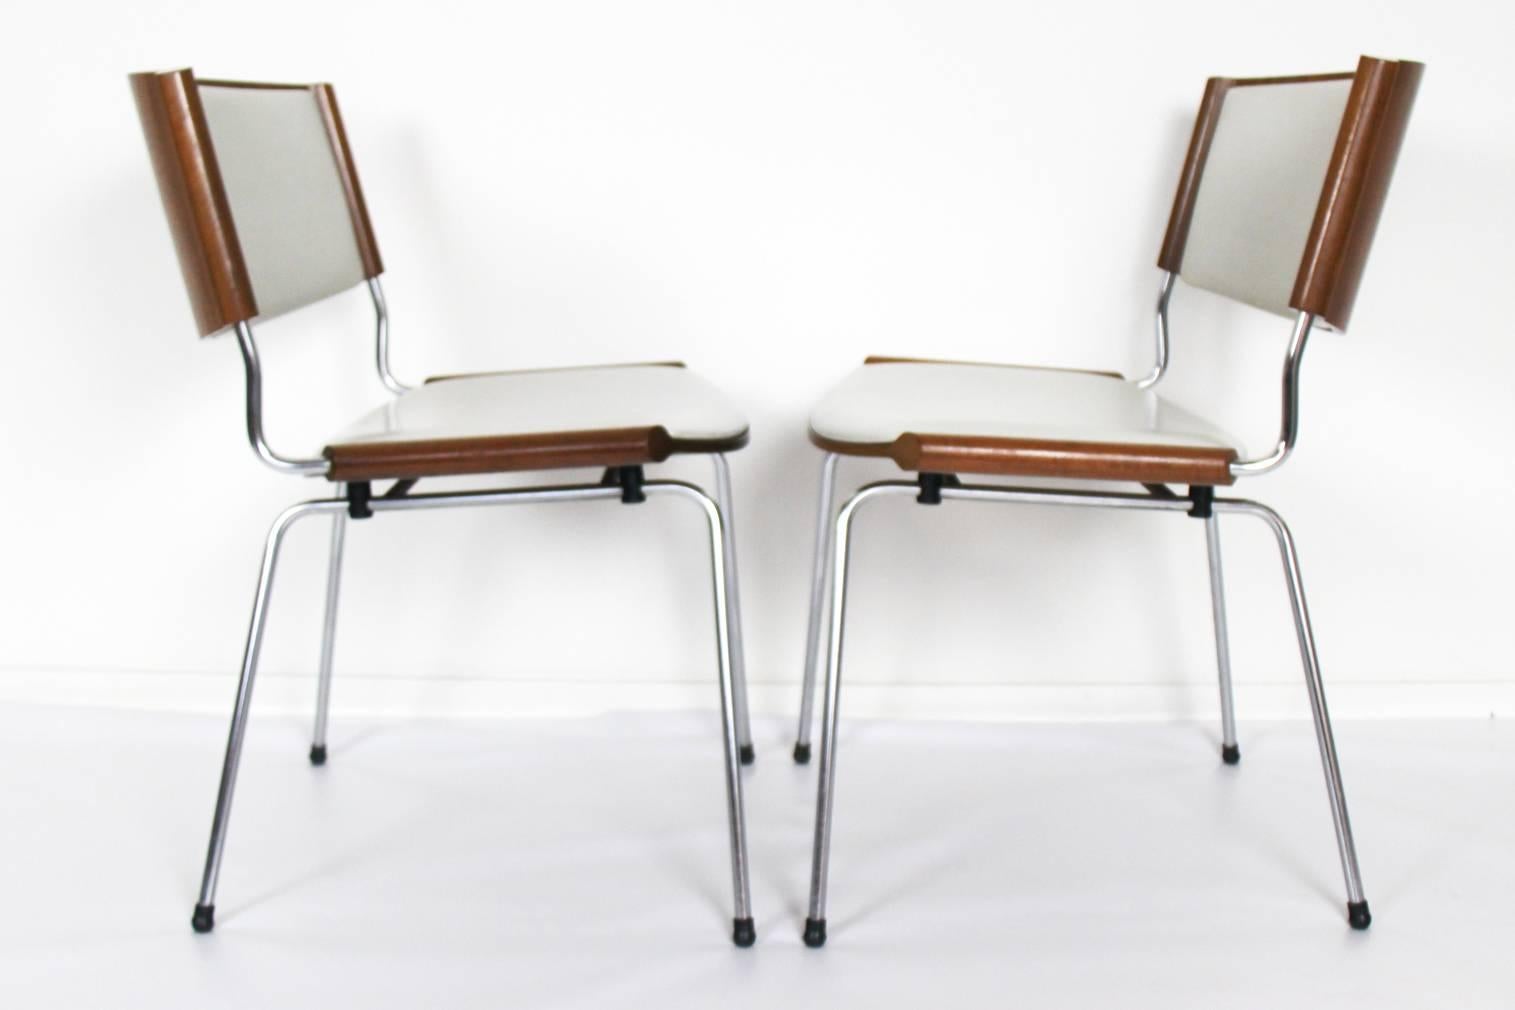 Set of Four M150 Dining Chairs by Nanna Ditzel for Kolds Savvaerk, Denmark, 1958 For Sale 1